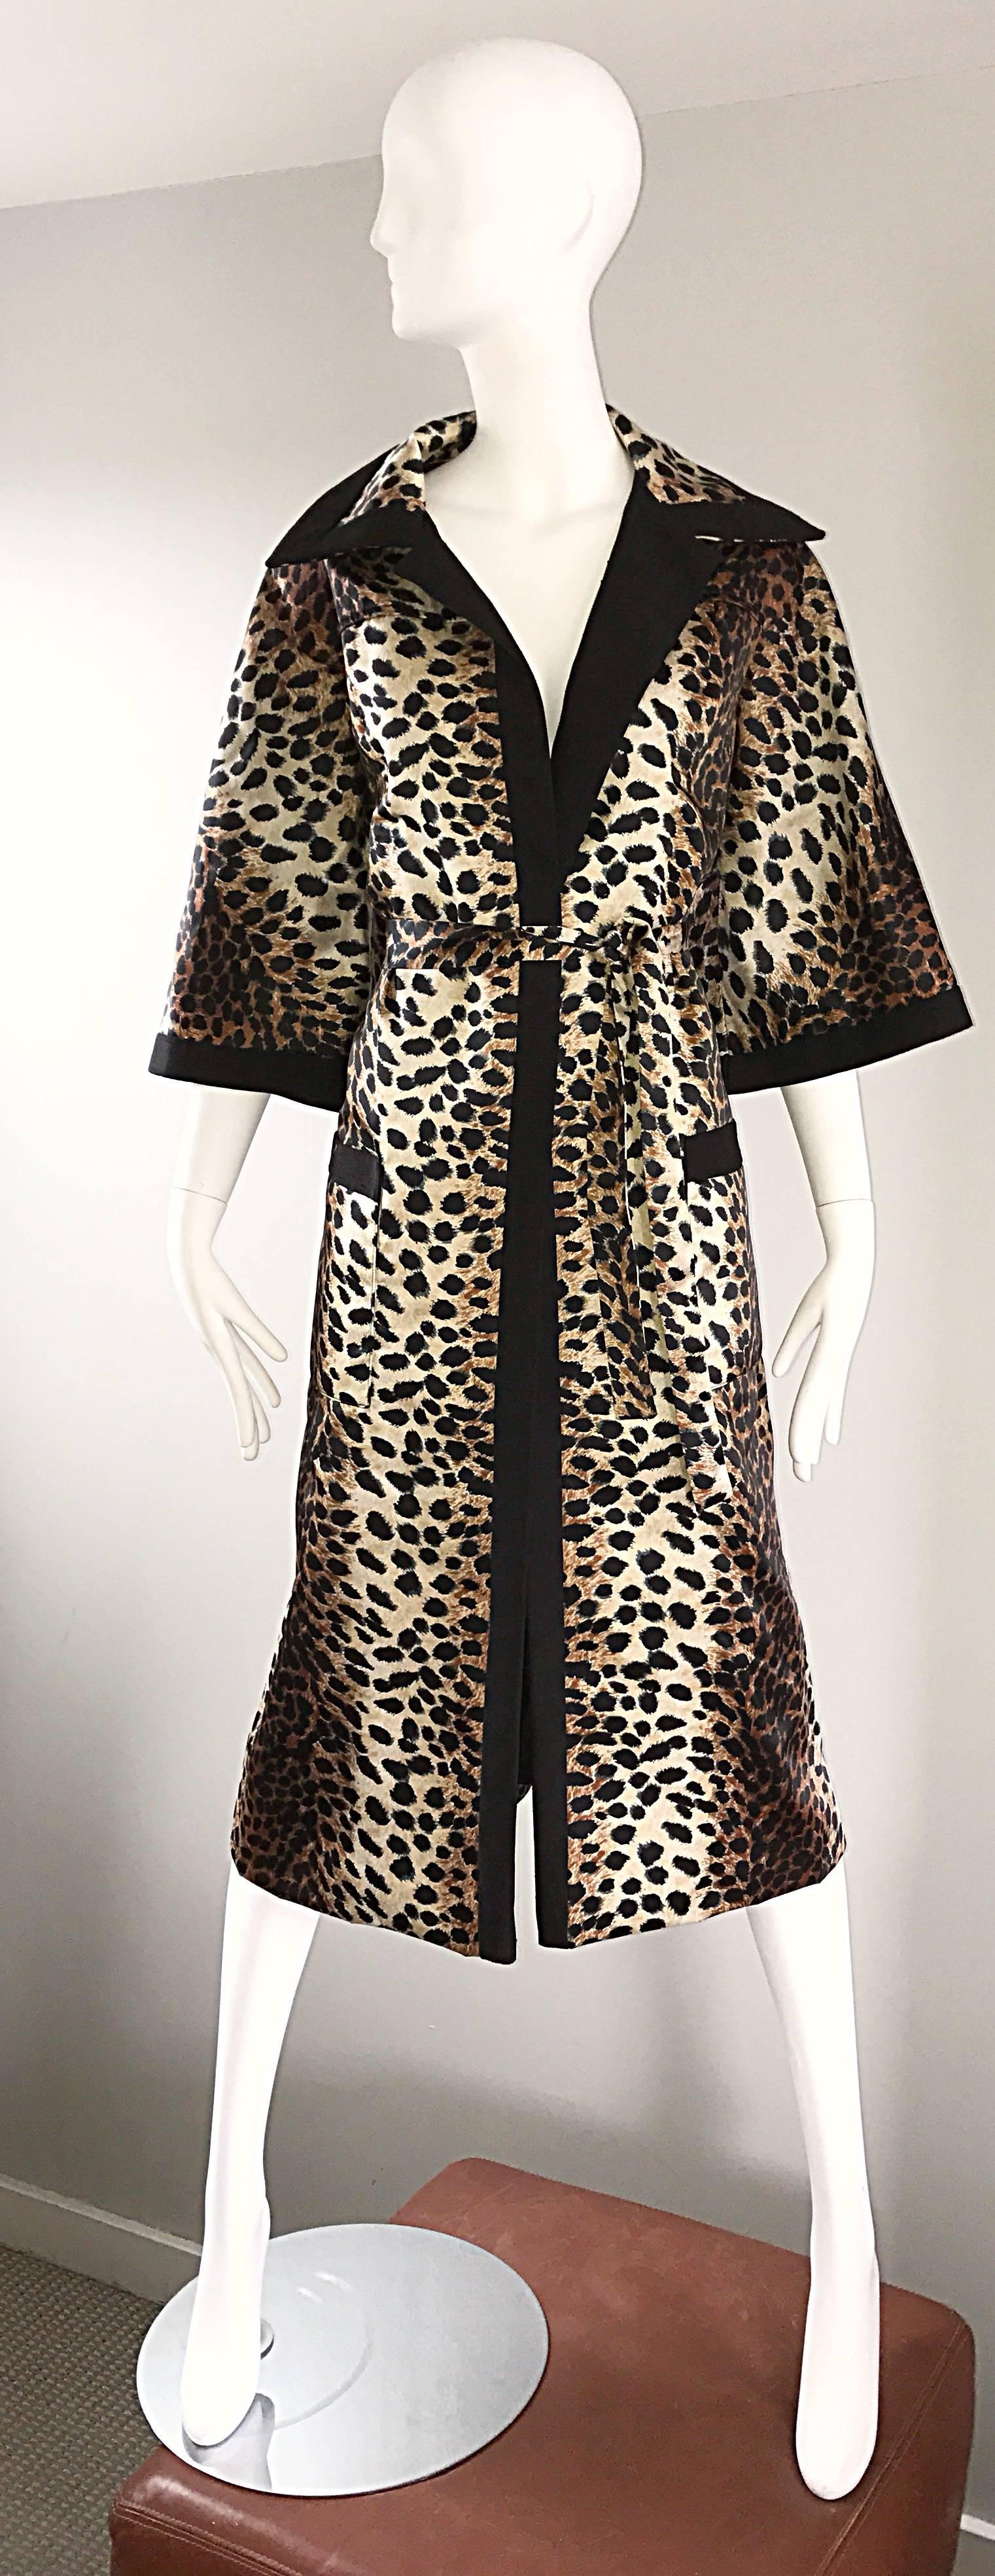 Fabulous vintage 1960s LILLI ANN leopard print belted trench jacket! Features chic 3/4 bell sleeves, and oversized lapels and collar. Patch pocket at each hip. Detachable matching belt. Timeless classic print that will last a lifetime! The perfect